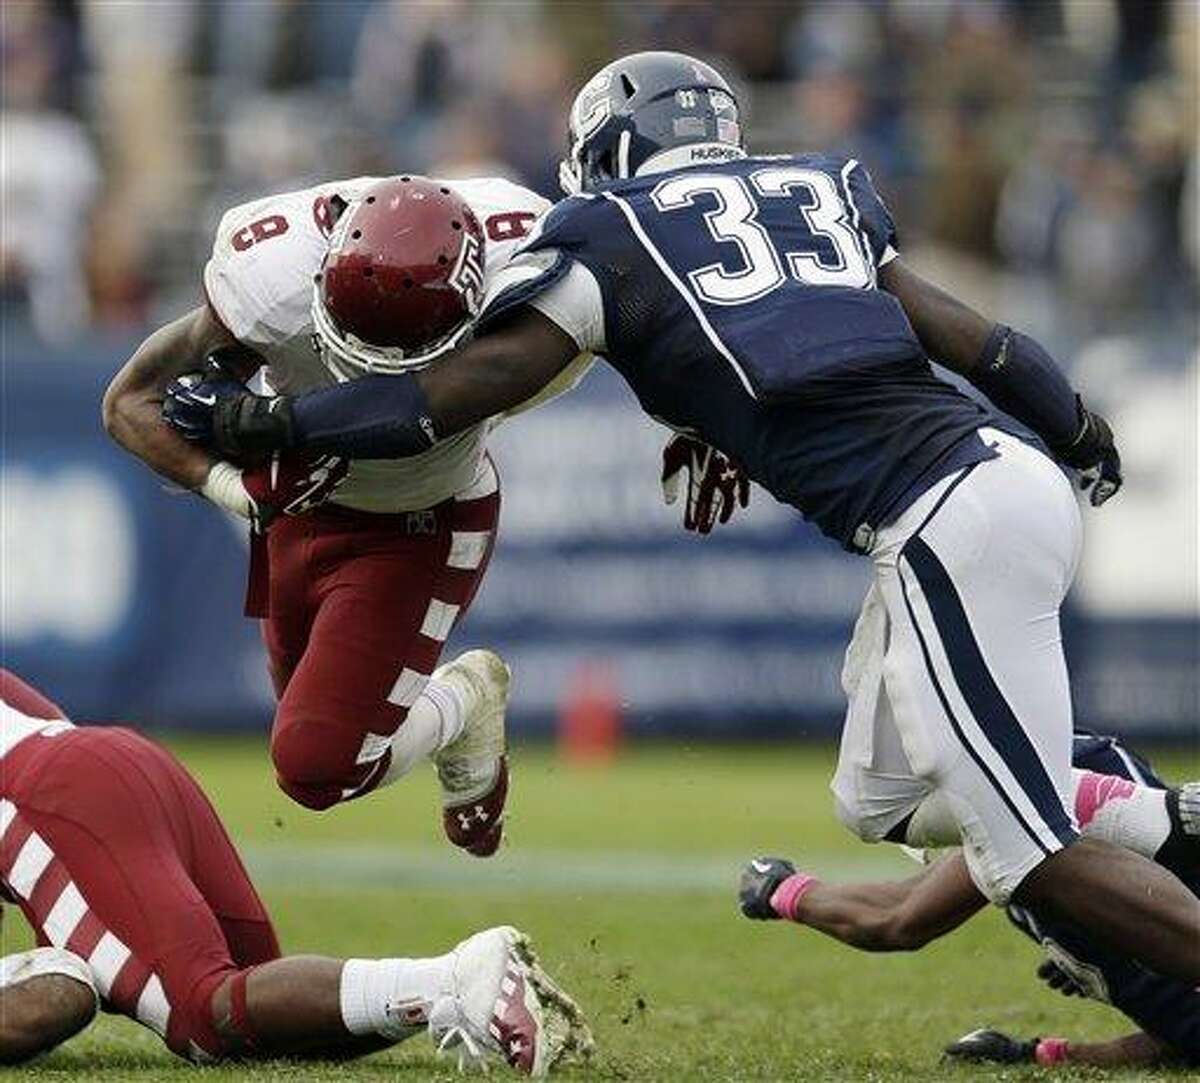 Connecticut linebacker Yawin Smallwood (33) tackles Temple running back Montel Harris (8) in overtime during an NCAA college football game in East Hartford, Conn., Saturday, Oct. 13, 2012. Temple won 17-14. (AP Photo/Michael Dwyer)